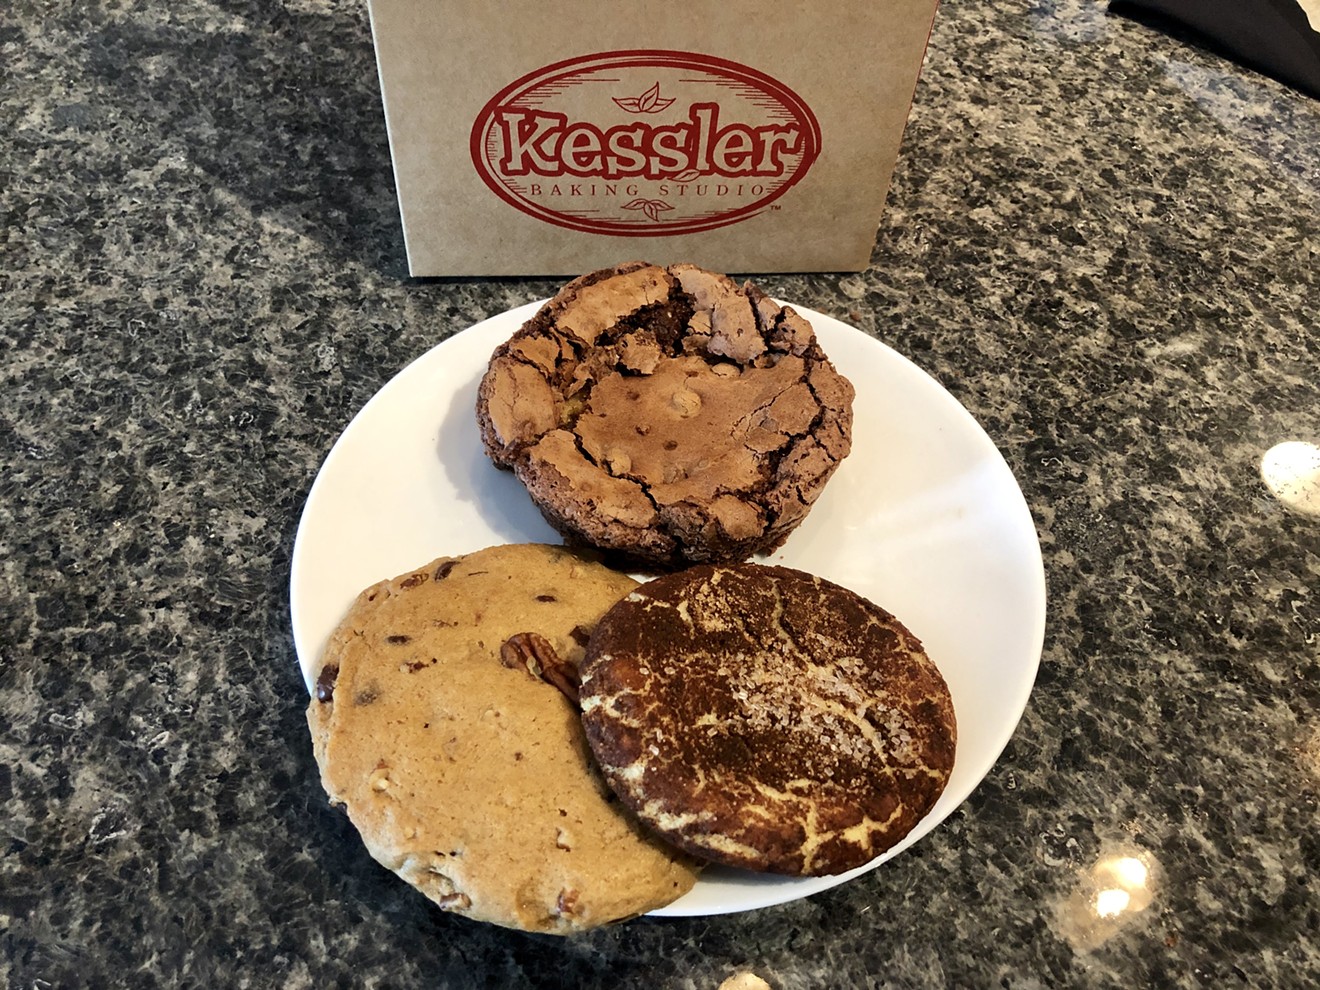 Only three of the 30 flavors of cookies from Kessler Baking Studio.